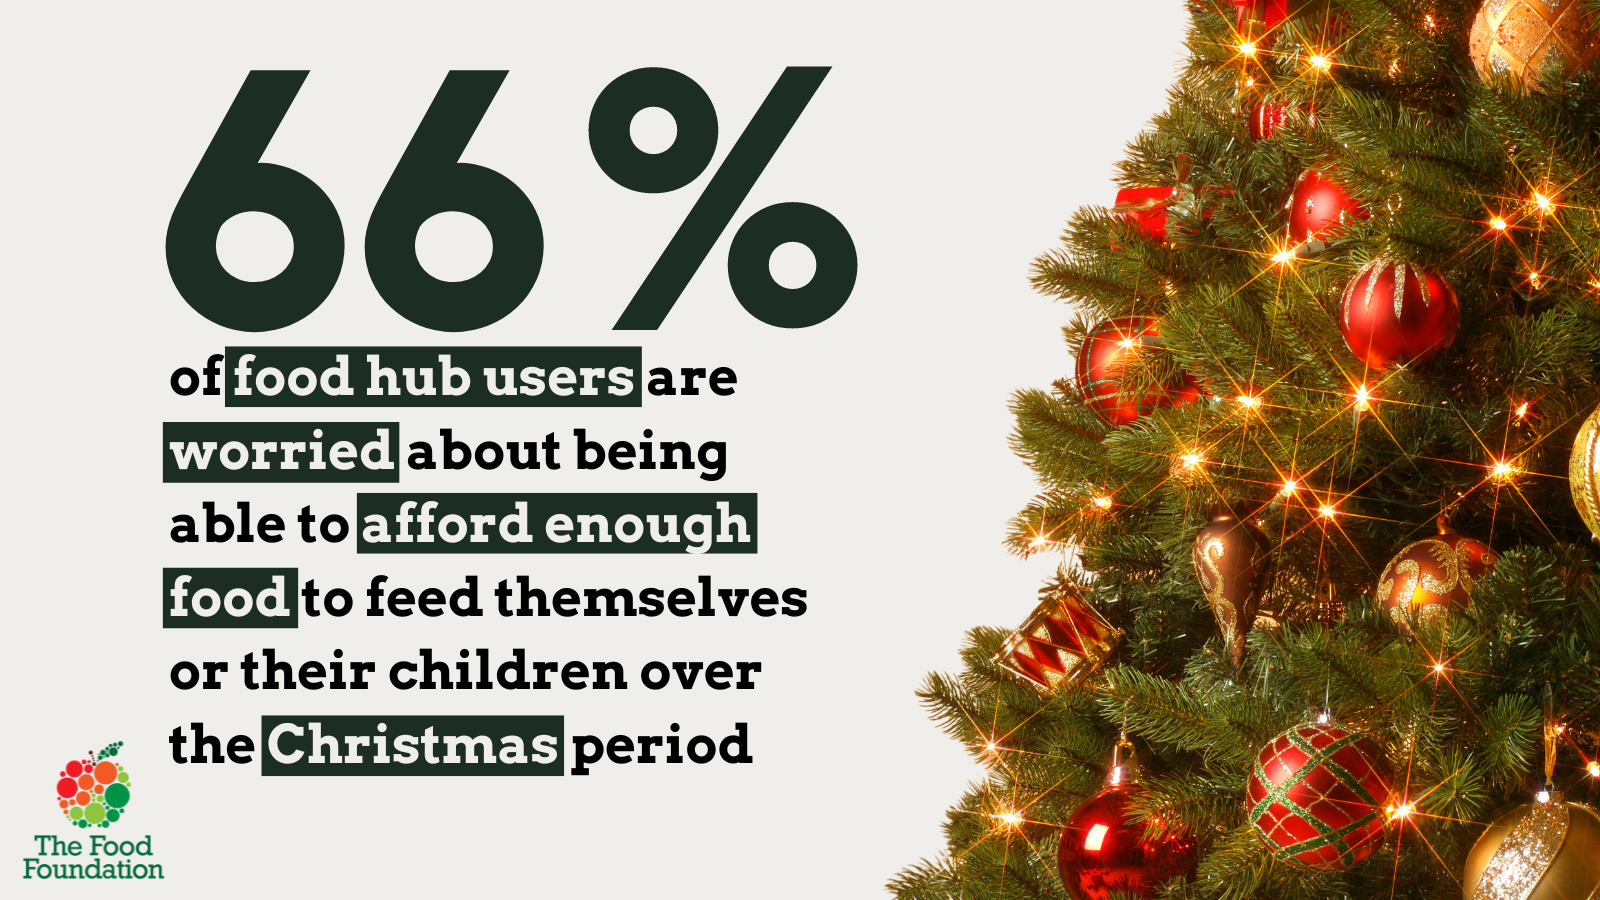 A Christmas seen in the foreground and a stat reading: 66% of food hub users are worried about being able to themselves or their children over the Christmas period